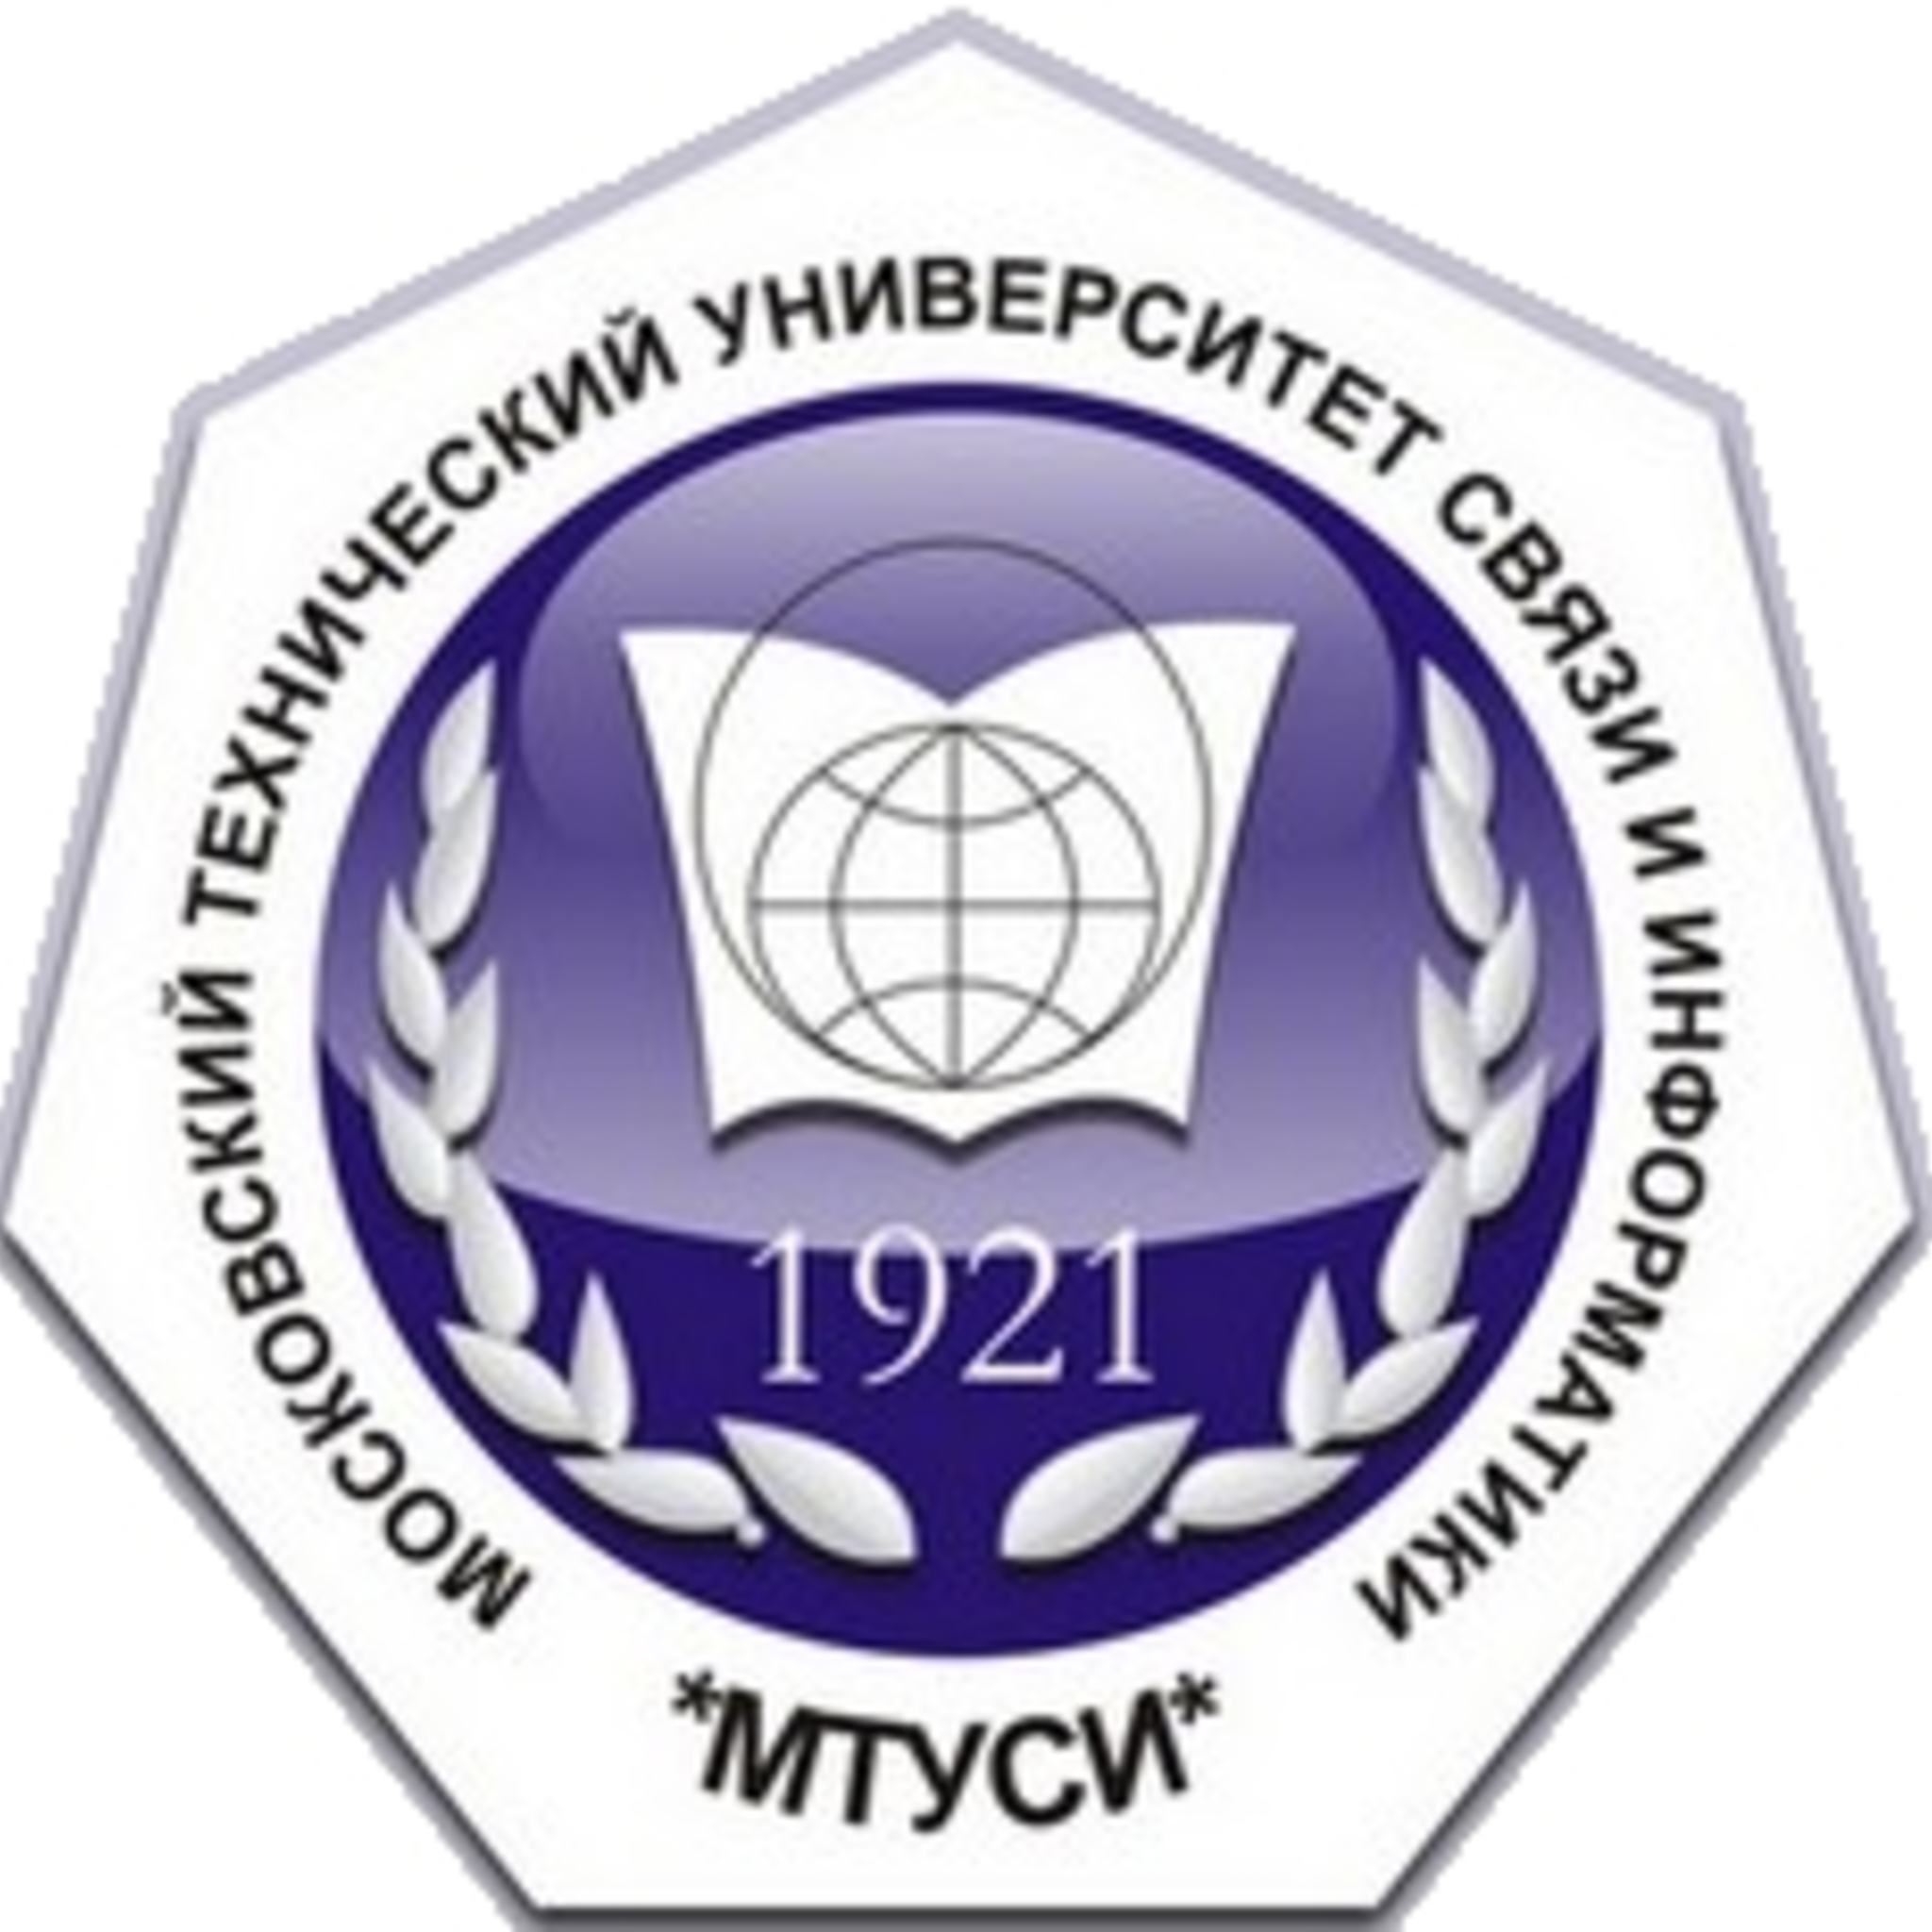 The exhibition Technical Education in Russia